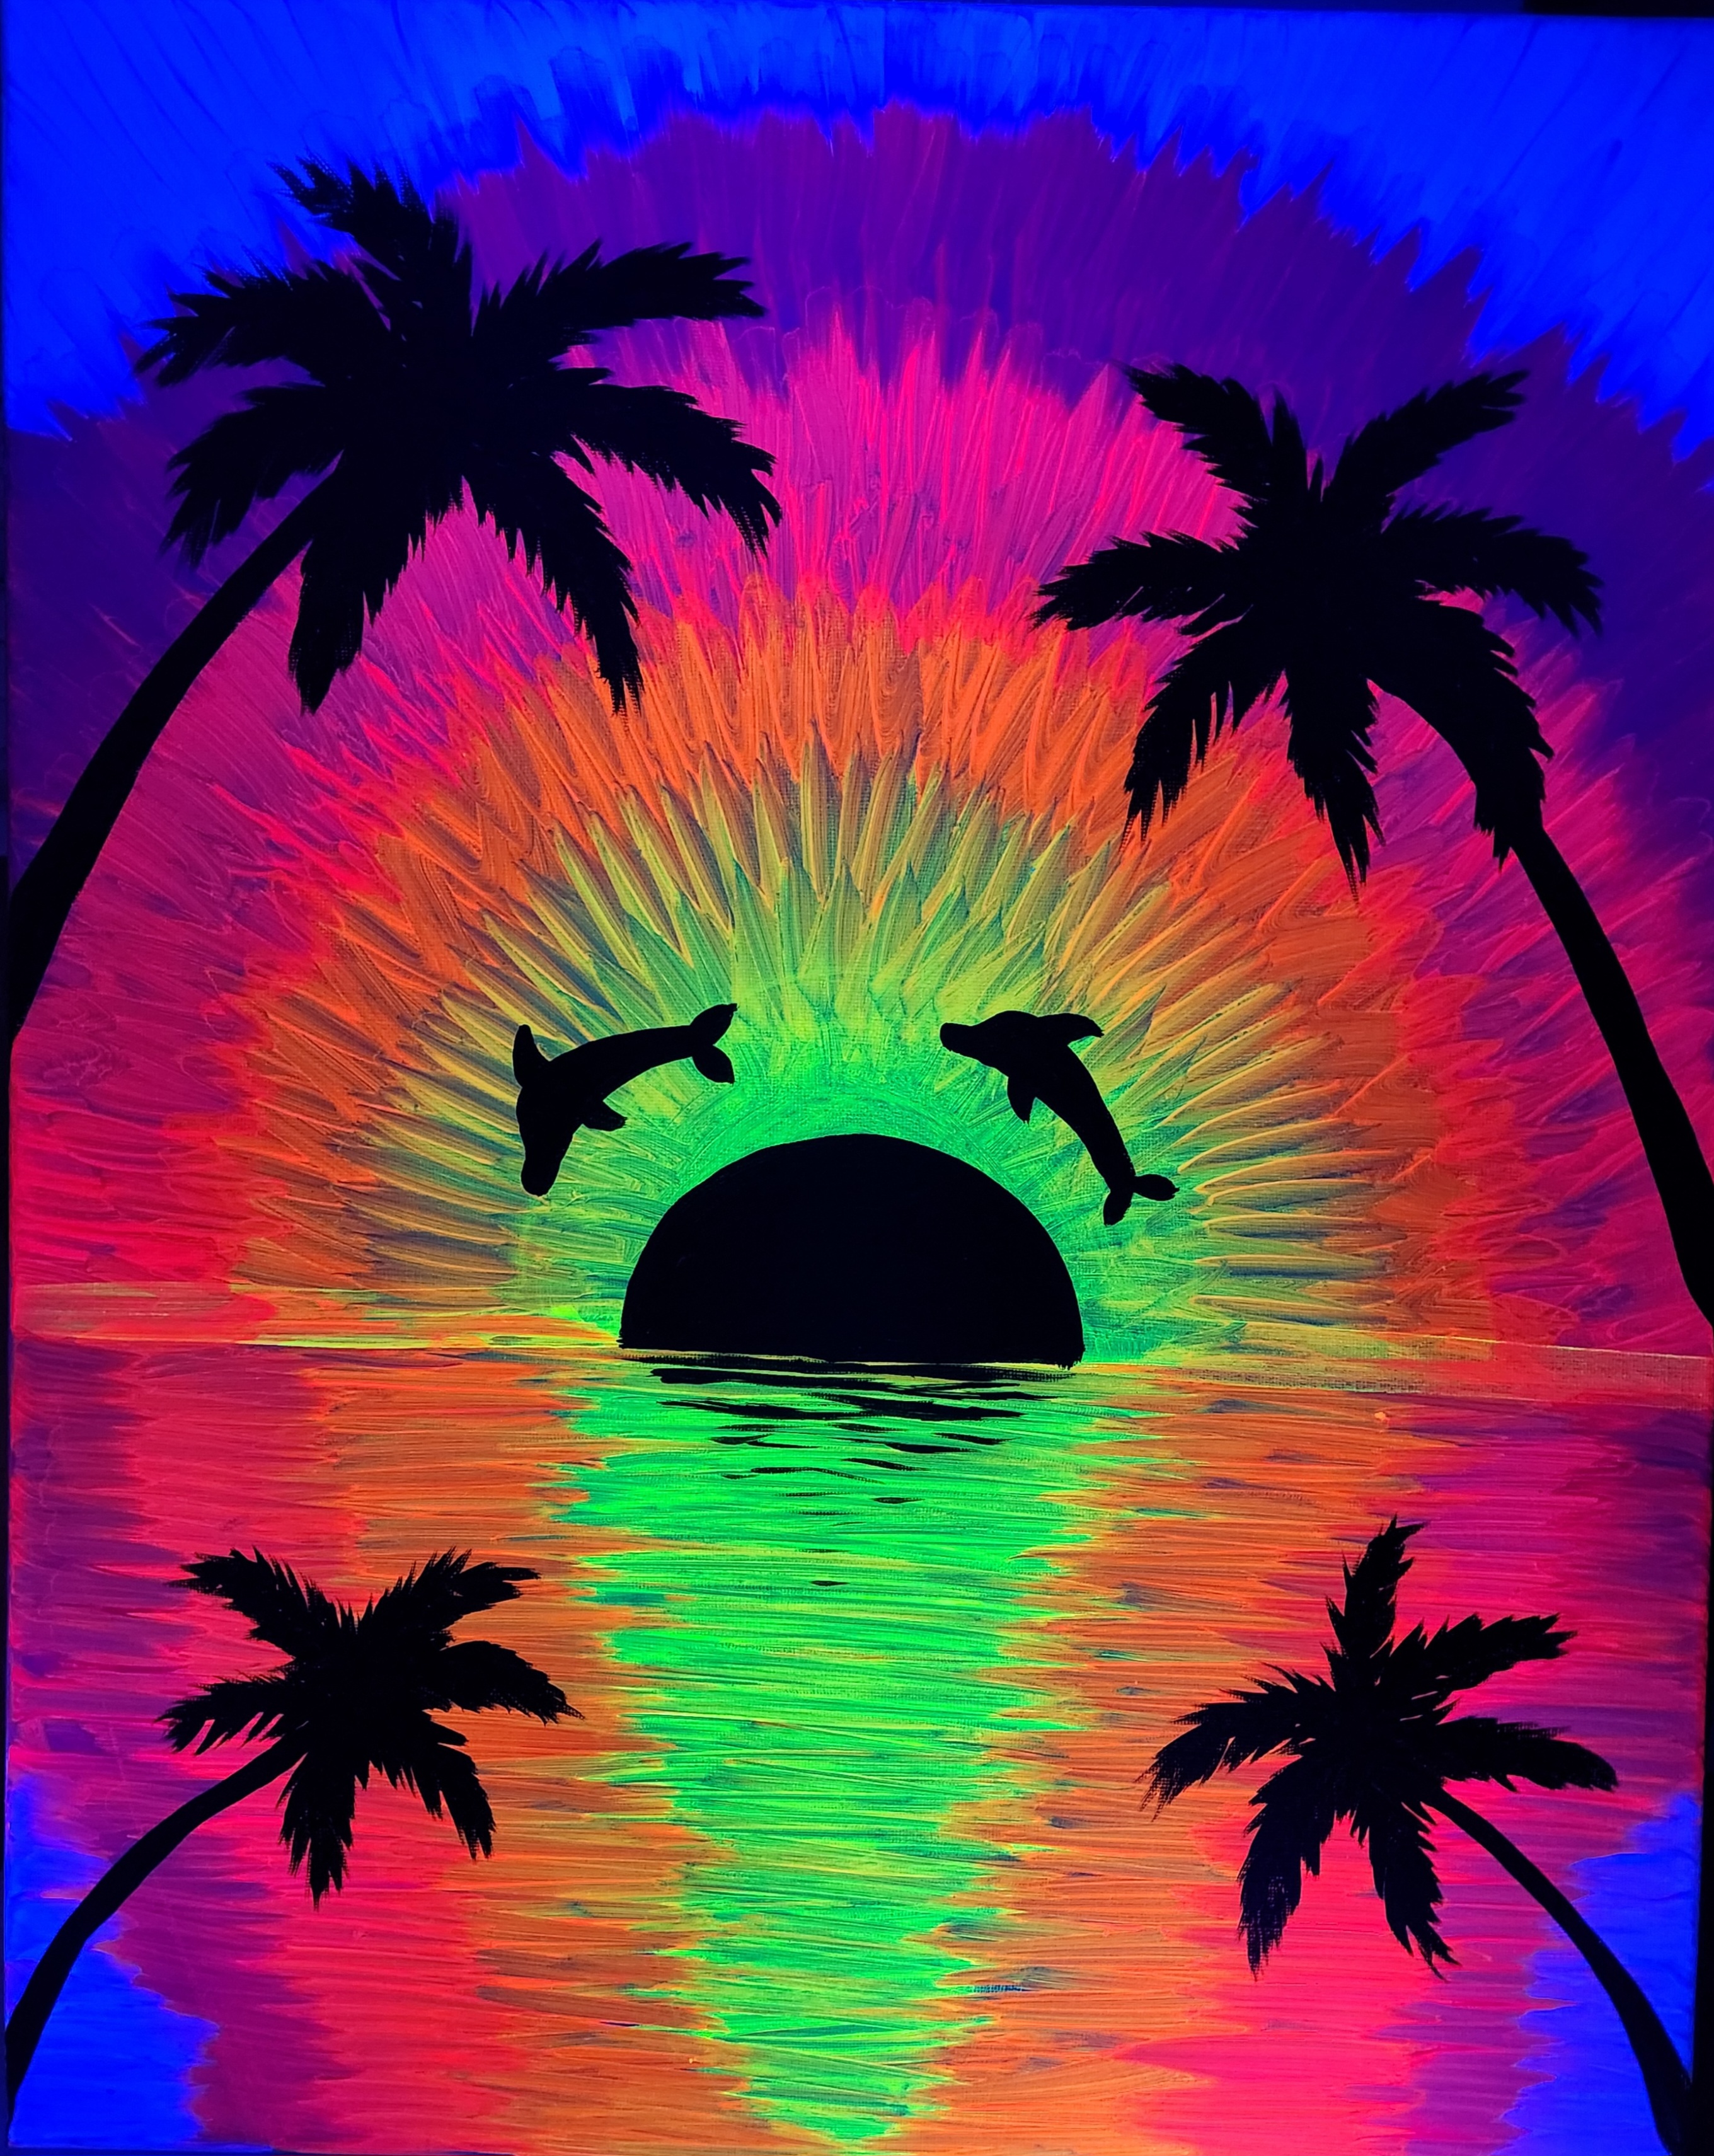 Psychedelic Summer